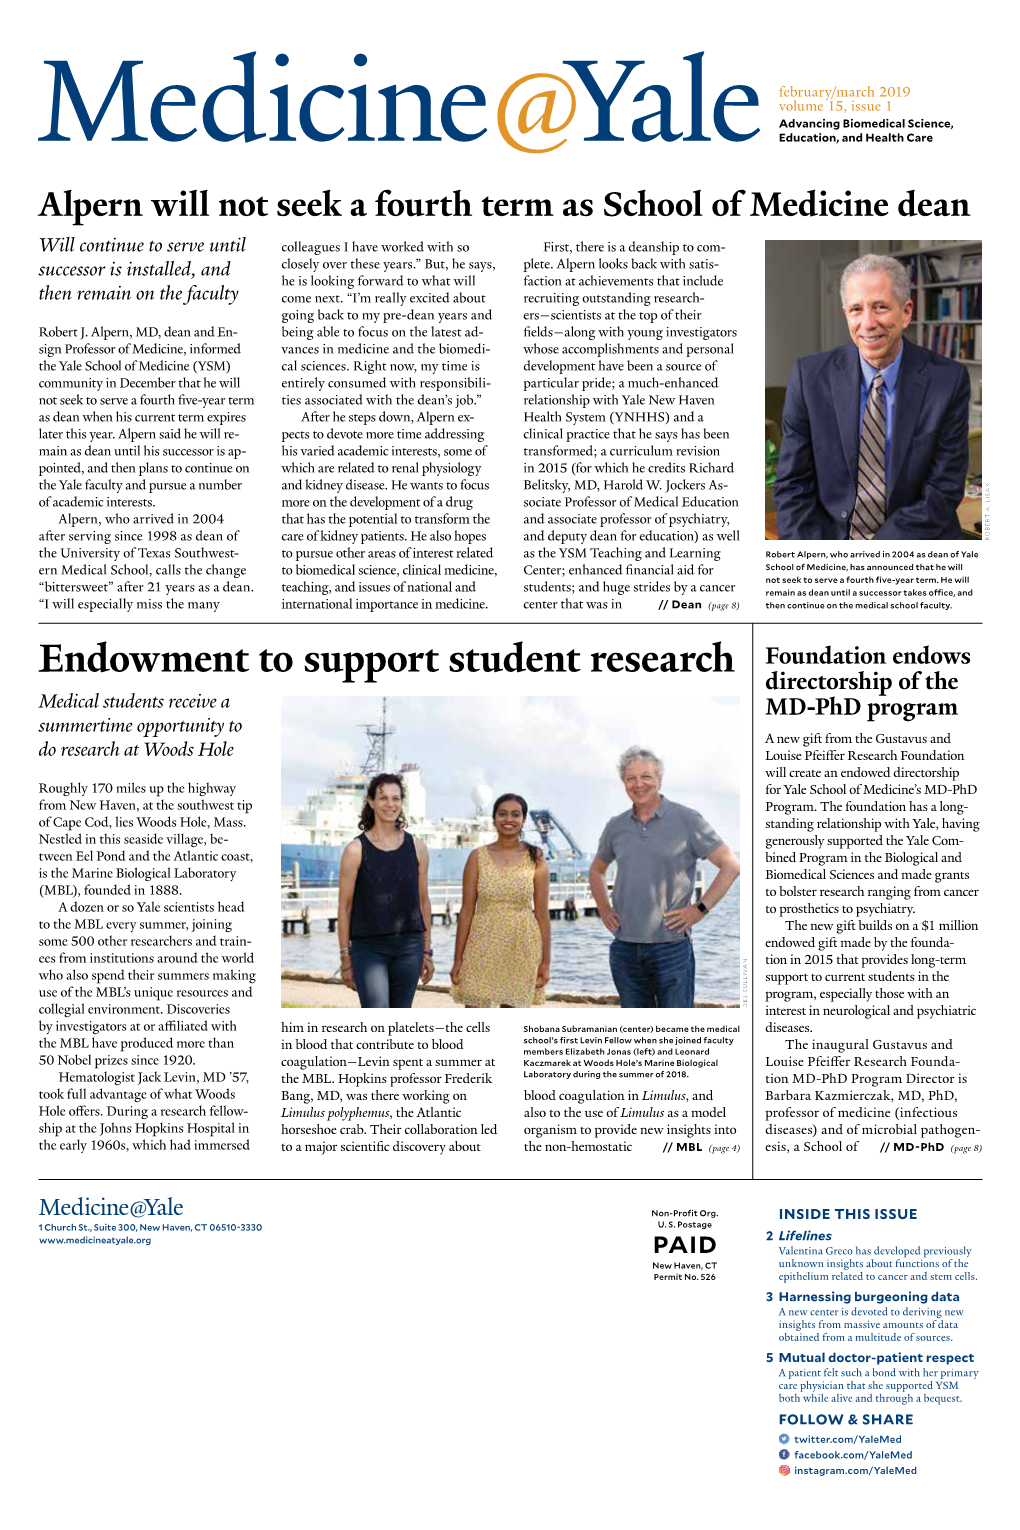 Endowment to Support Student Research